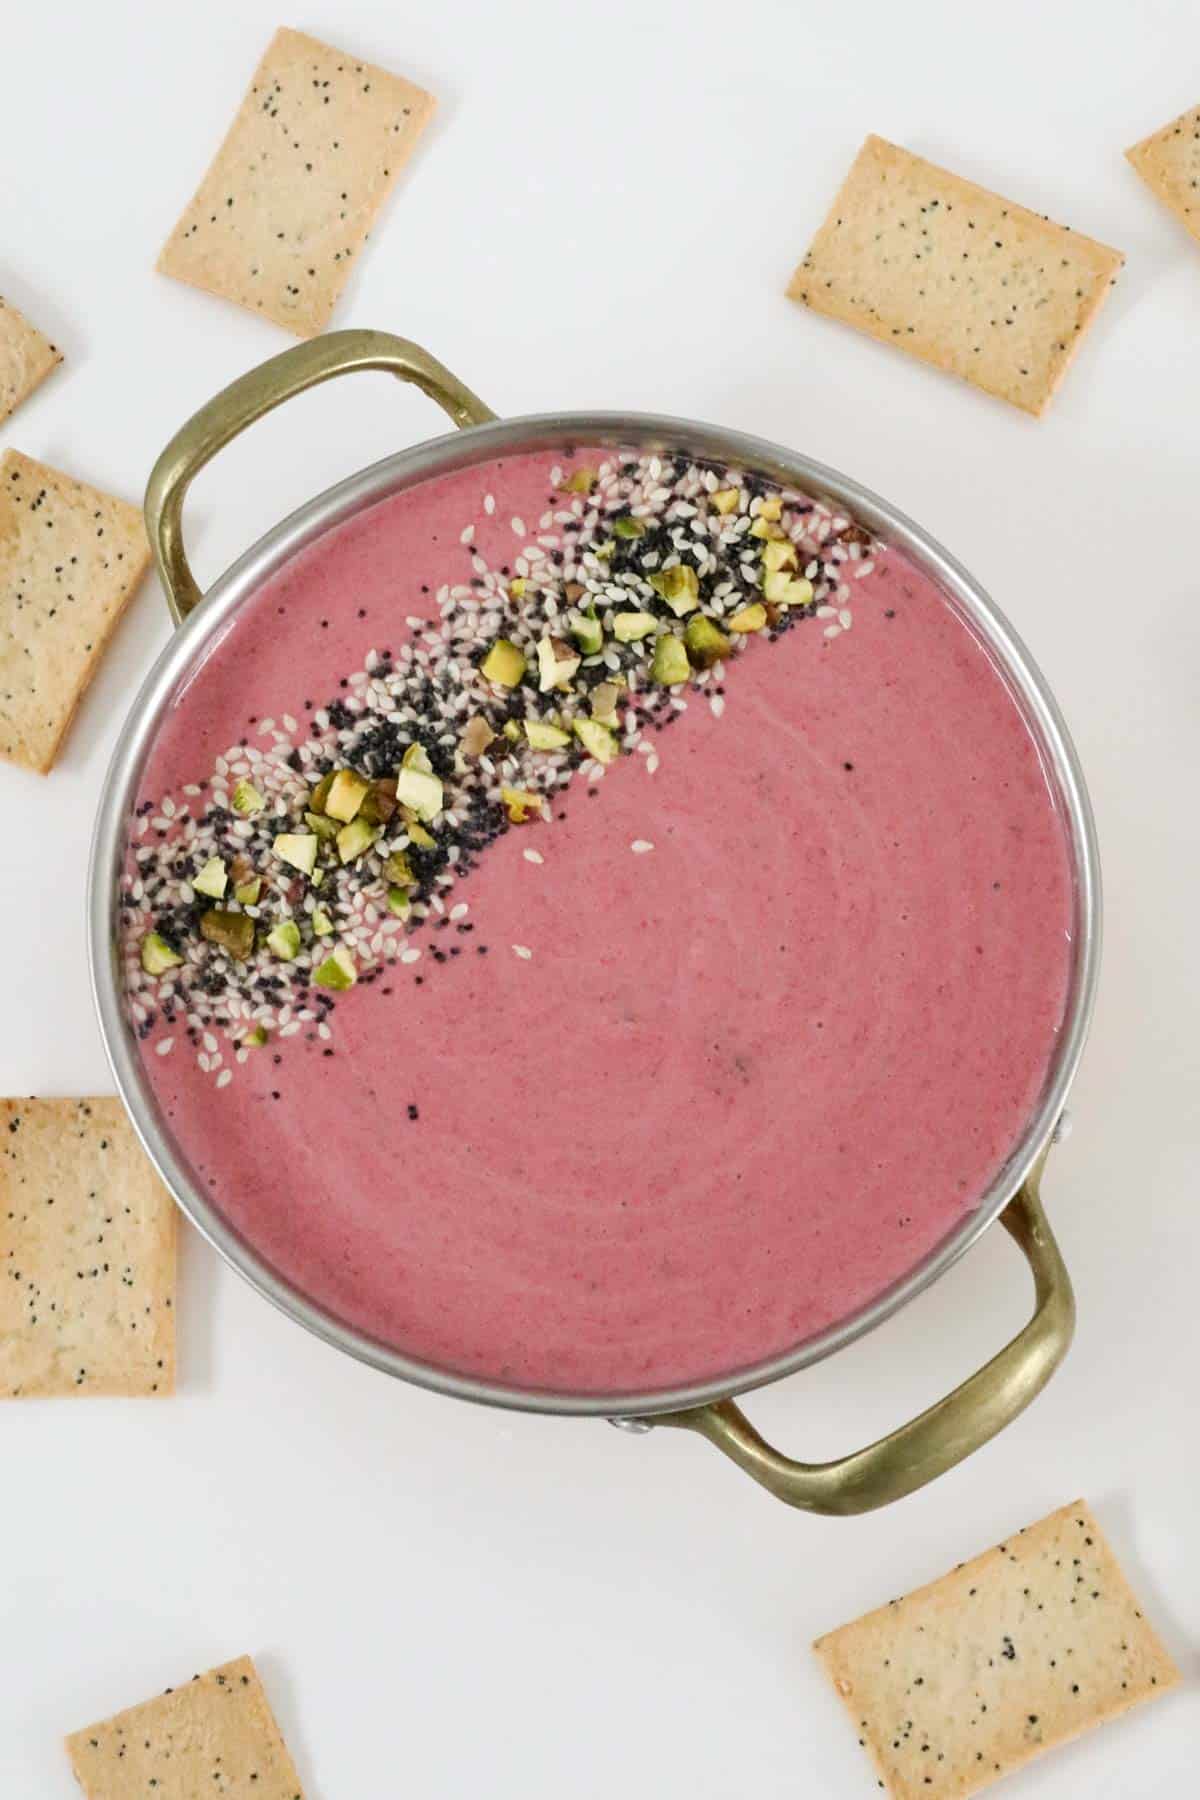 A beetroot dip in a bowl sprinkled with spicy dukkah.